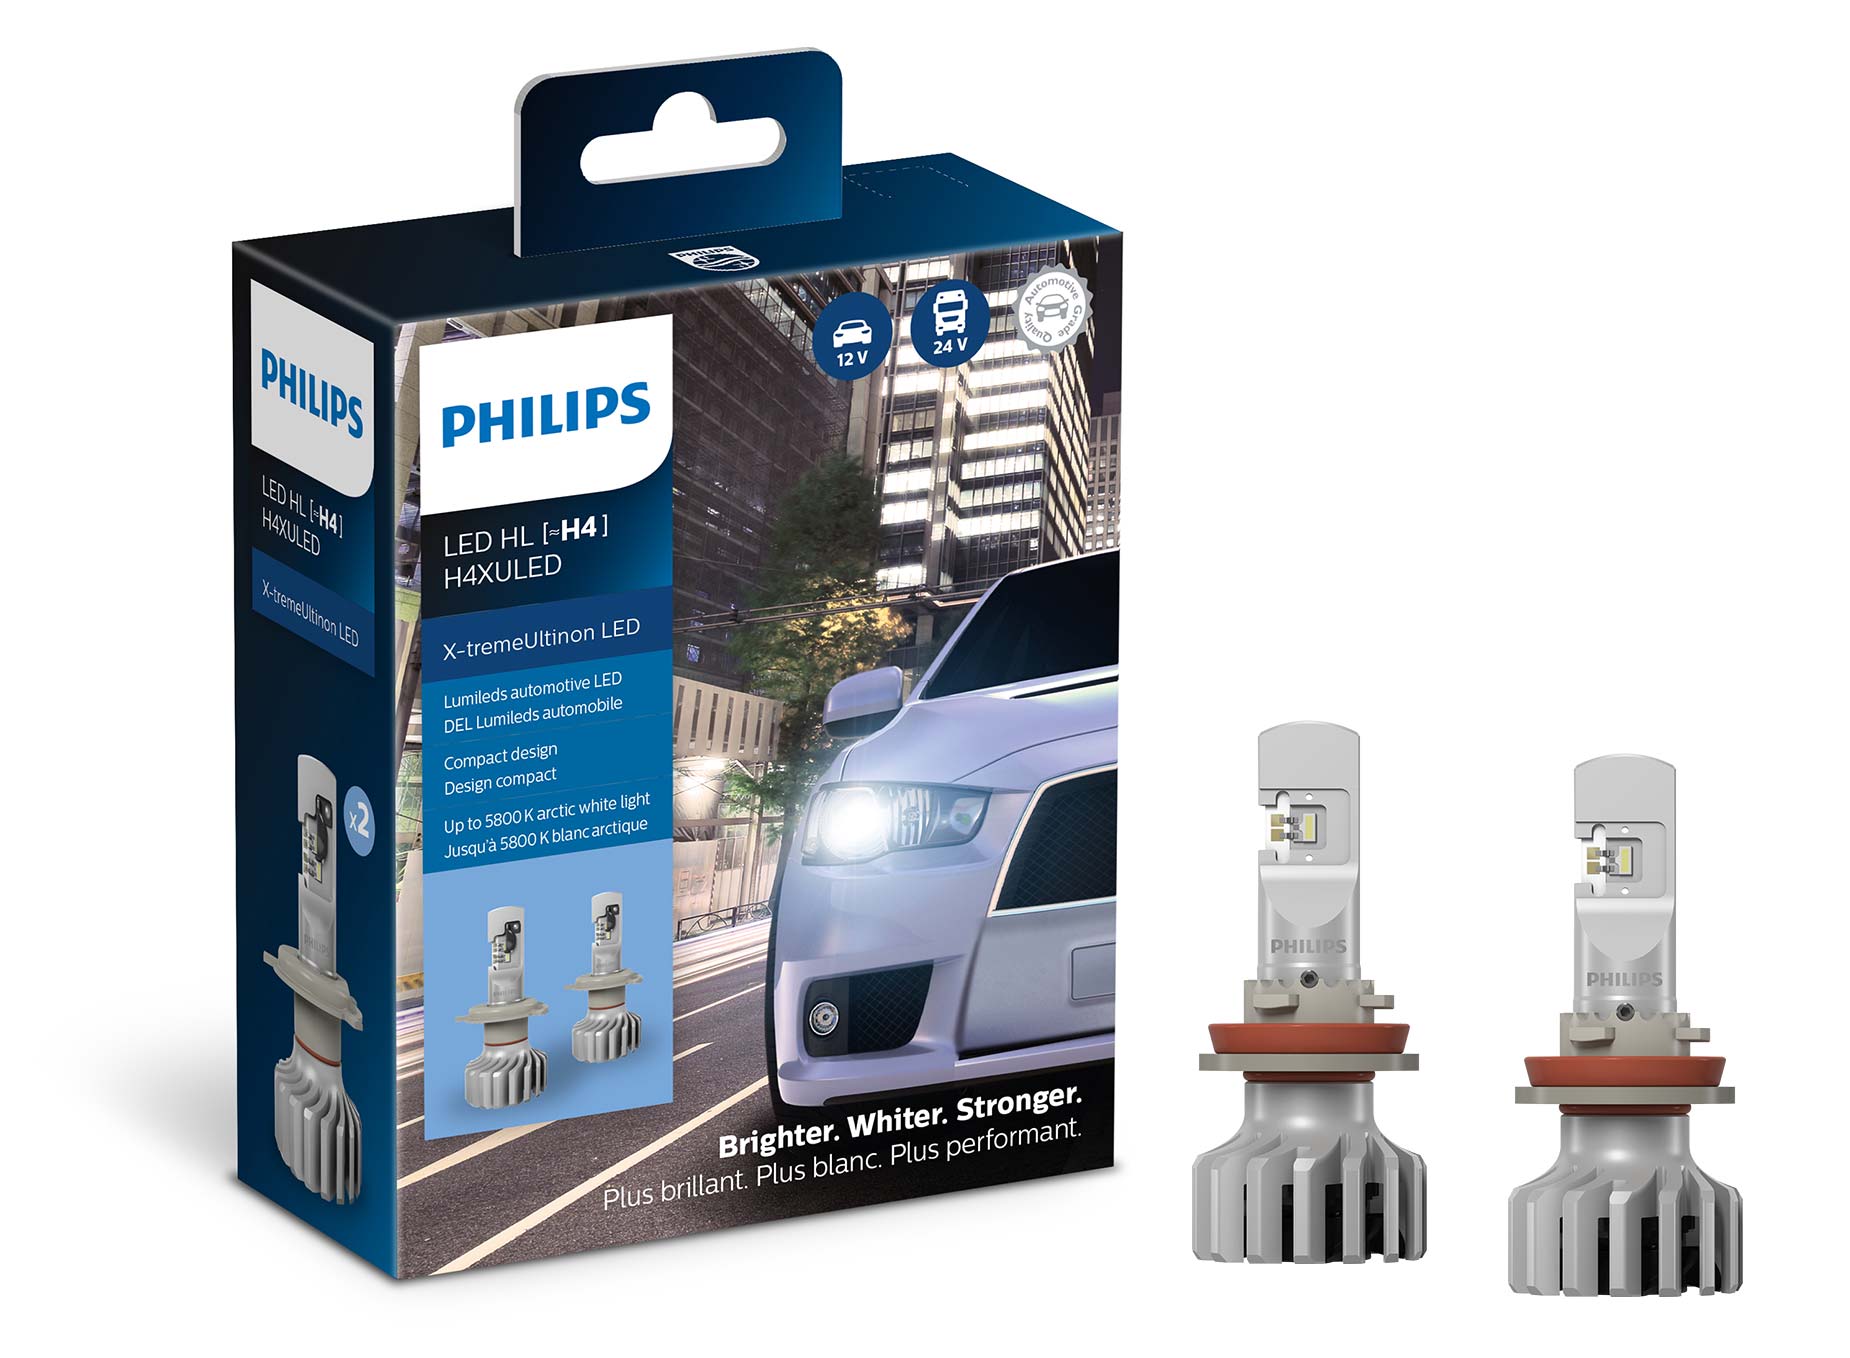 Philips Ultinon Essential LED Fog Lights A Powerful Upgrade